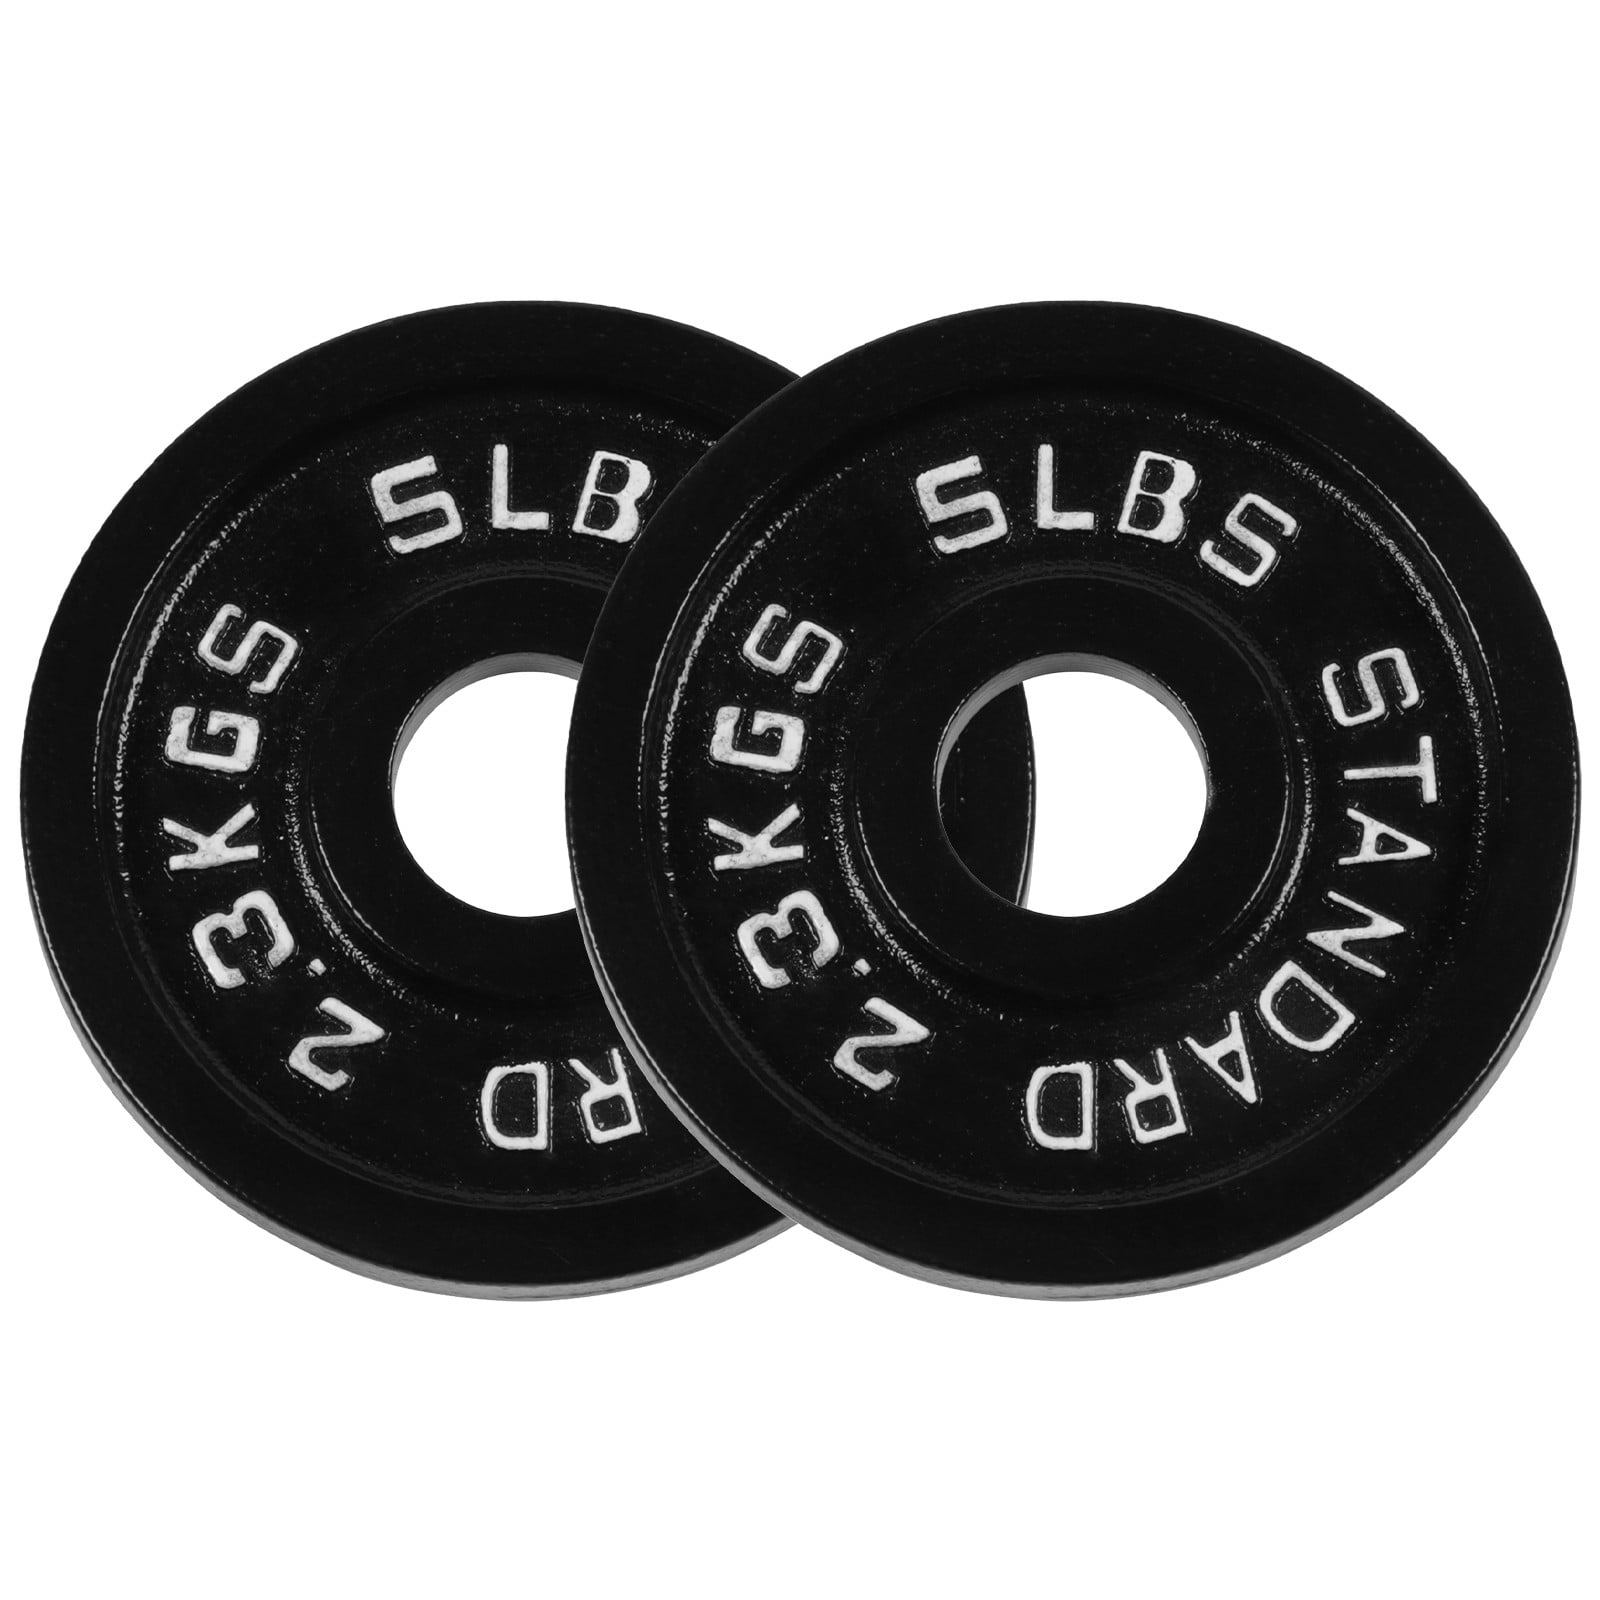 5.5 lbs-44 lbs Olympic Barbell Standard 2” Exercise Weights Plates Gym Home 